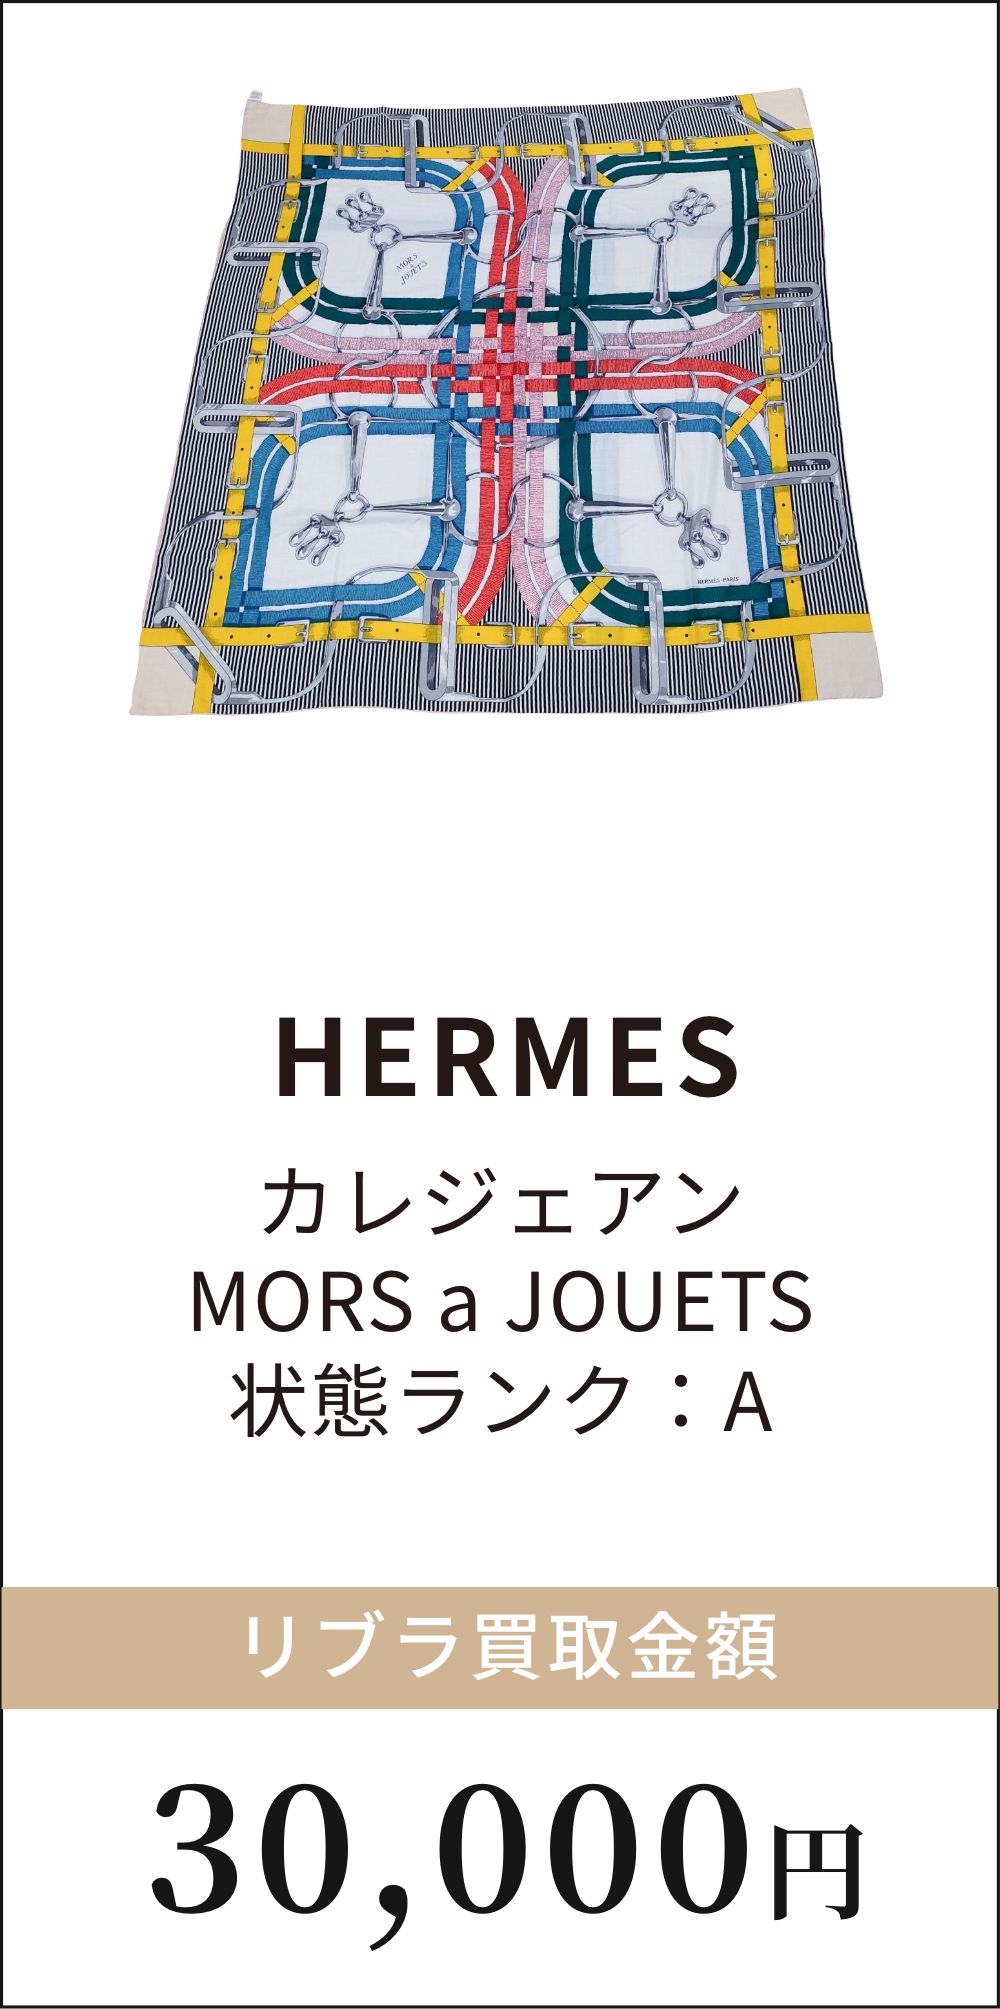 HERMES カレジュアン MORE a JOUETS